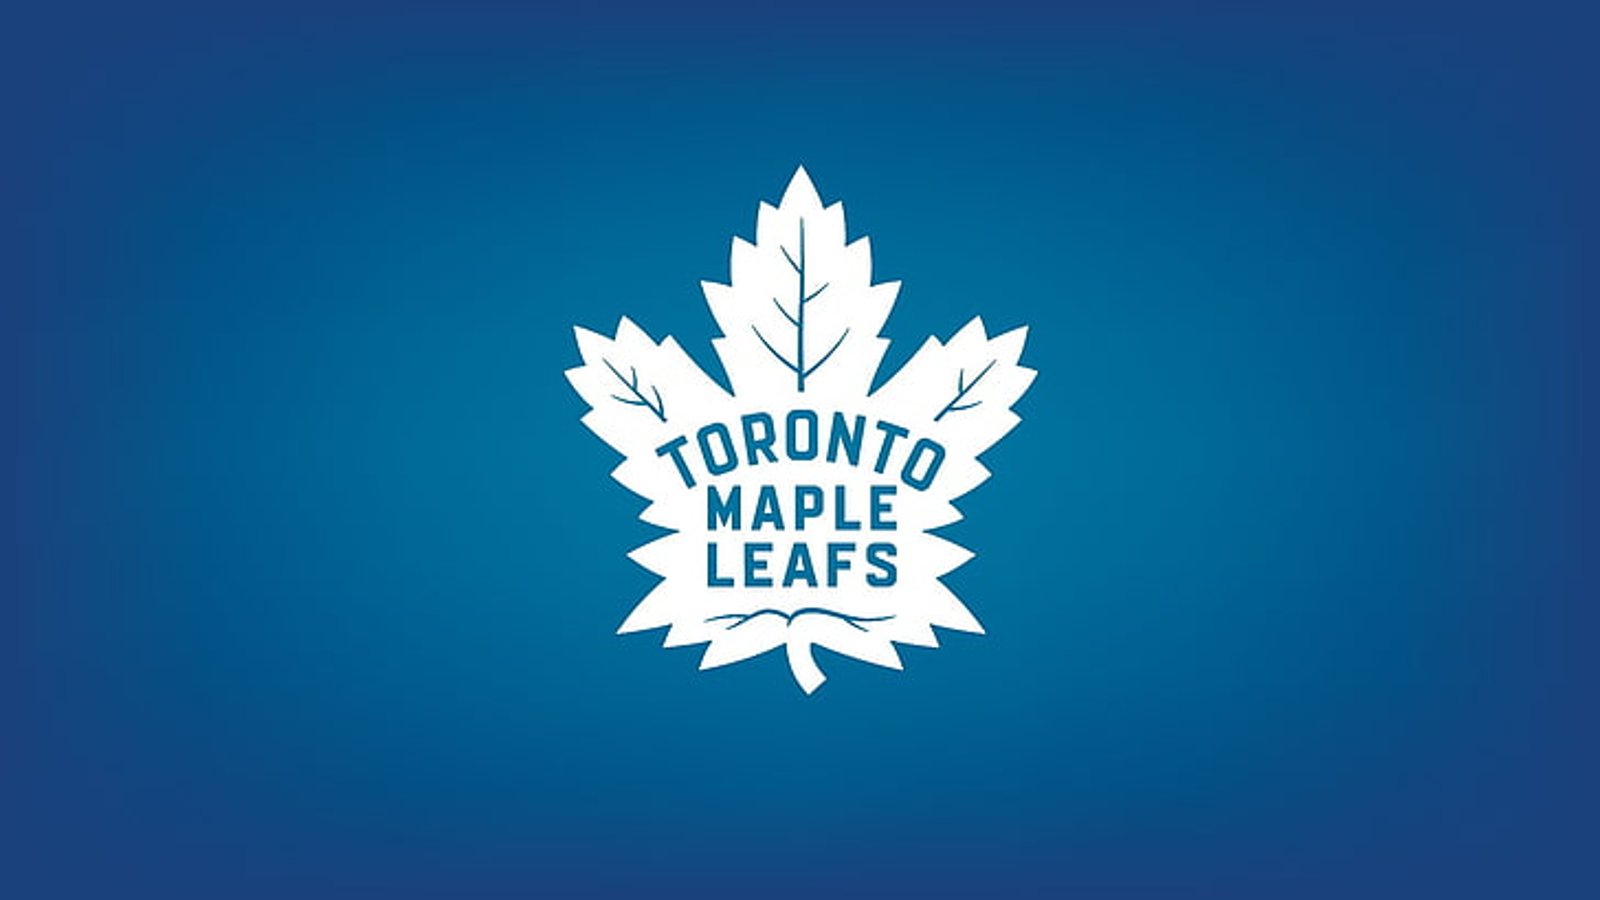 Maple Leafs announce roster move ahead of divisional matchup vs. Sens